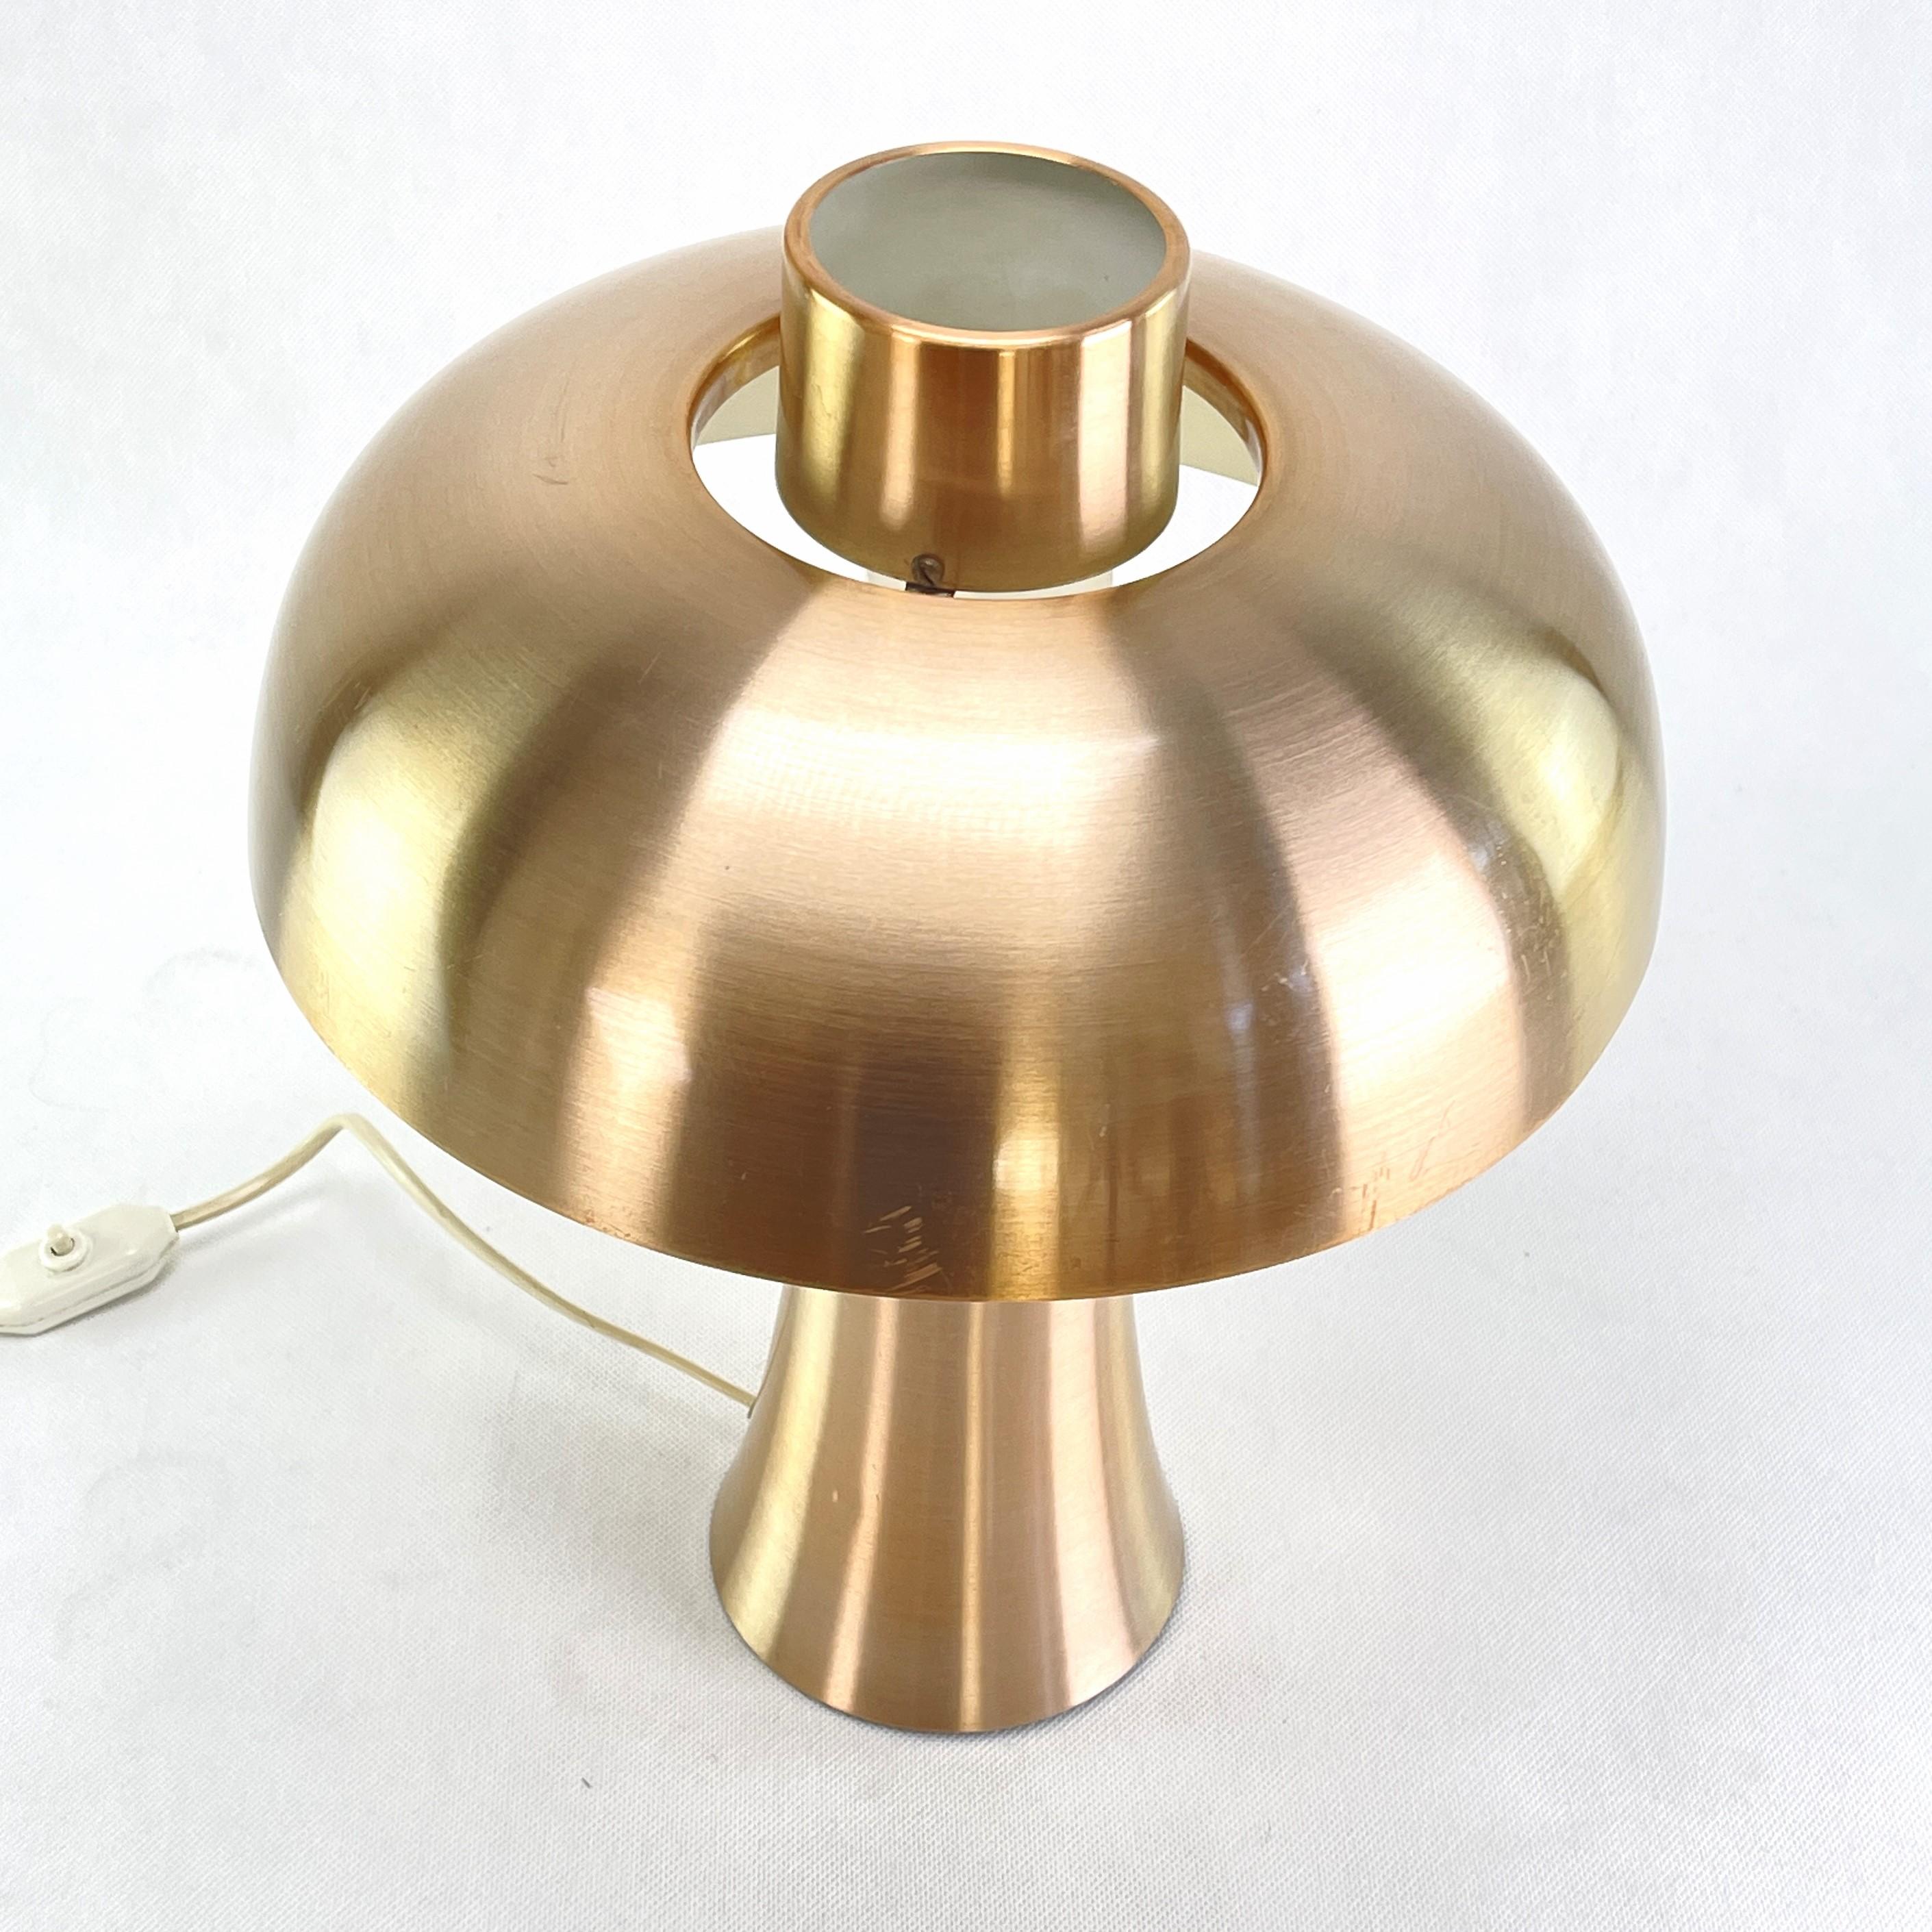 Anodized  Table Mushroom Lamp, Copper-Coloured by DORIA, 1970s For Sale